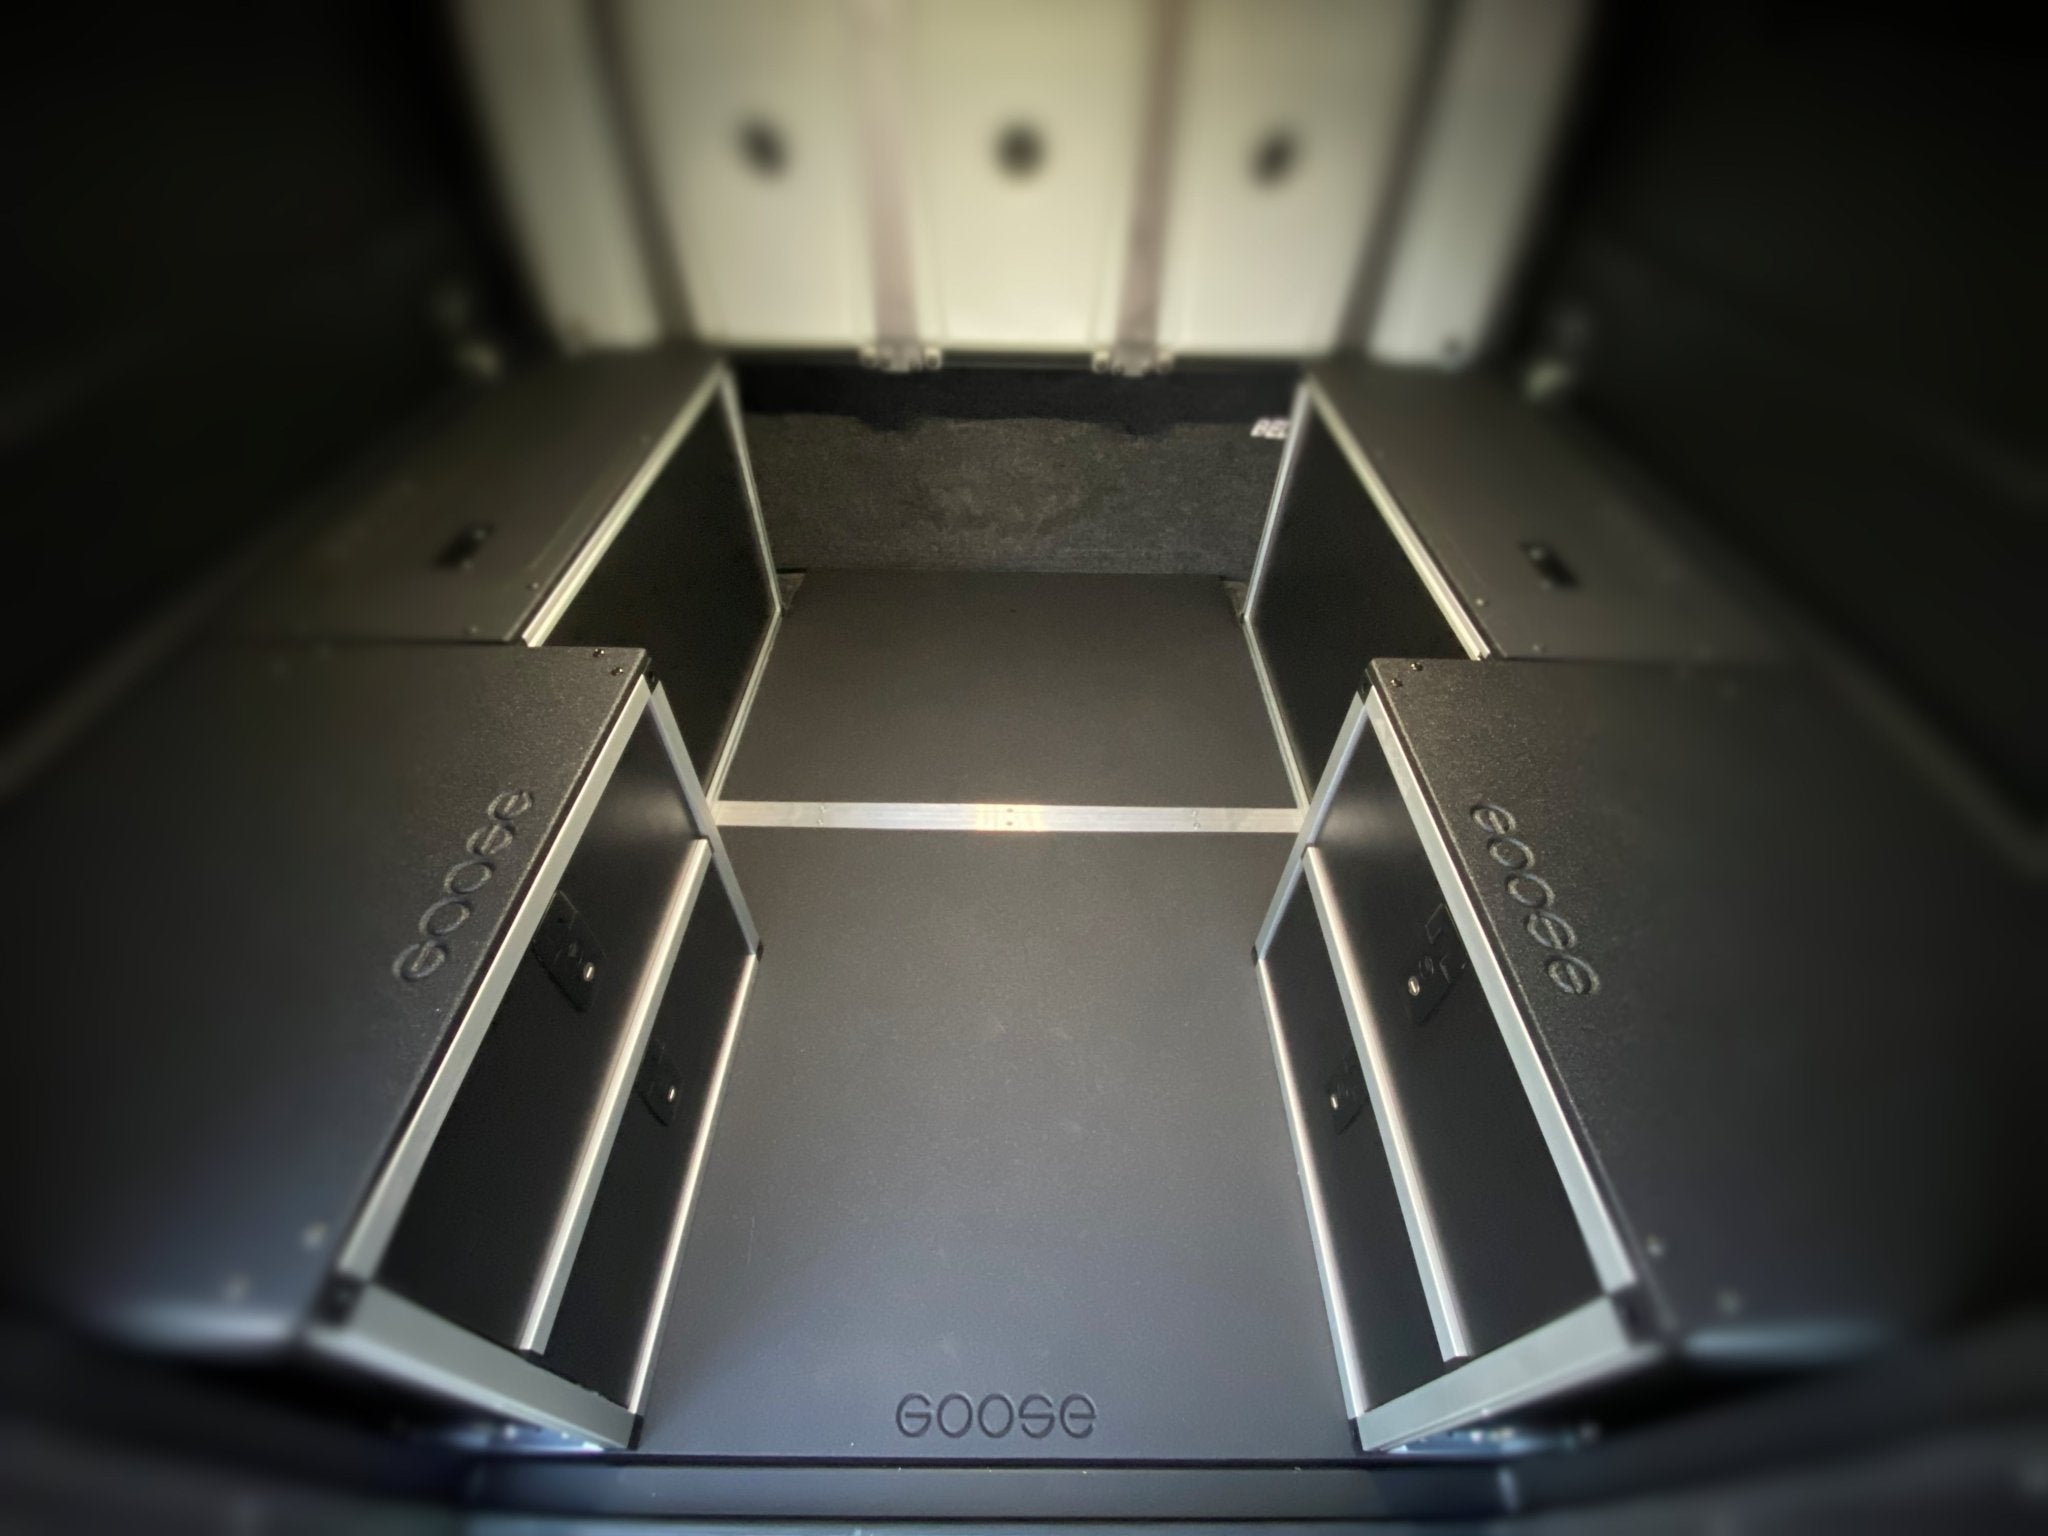 Goose Gear Alu-Cab Canopy Camper V2 - Chevy Colorado/GMC Canyon 2015-Present 2nd Gen. - Bed Plate System - 5&